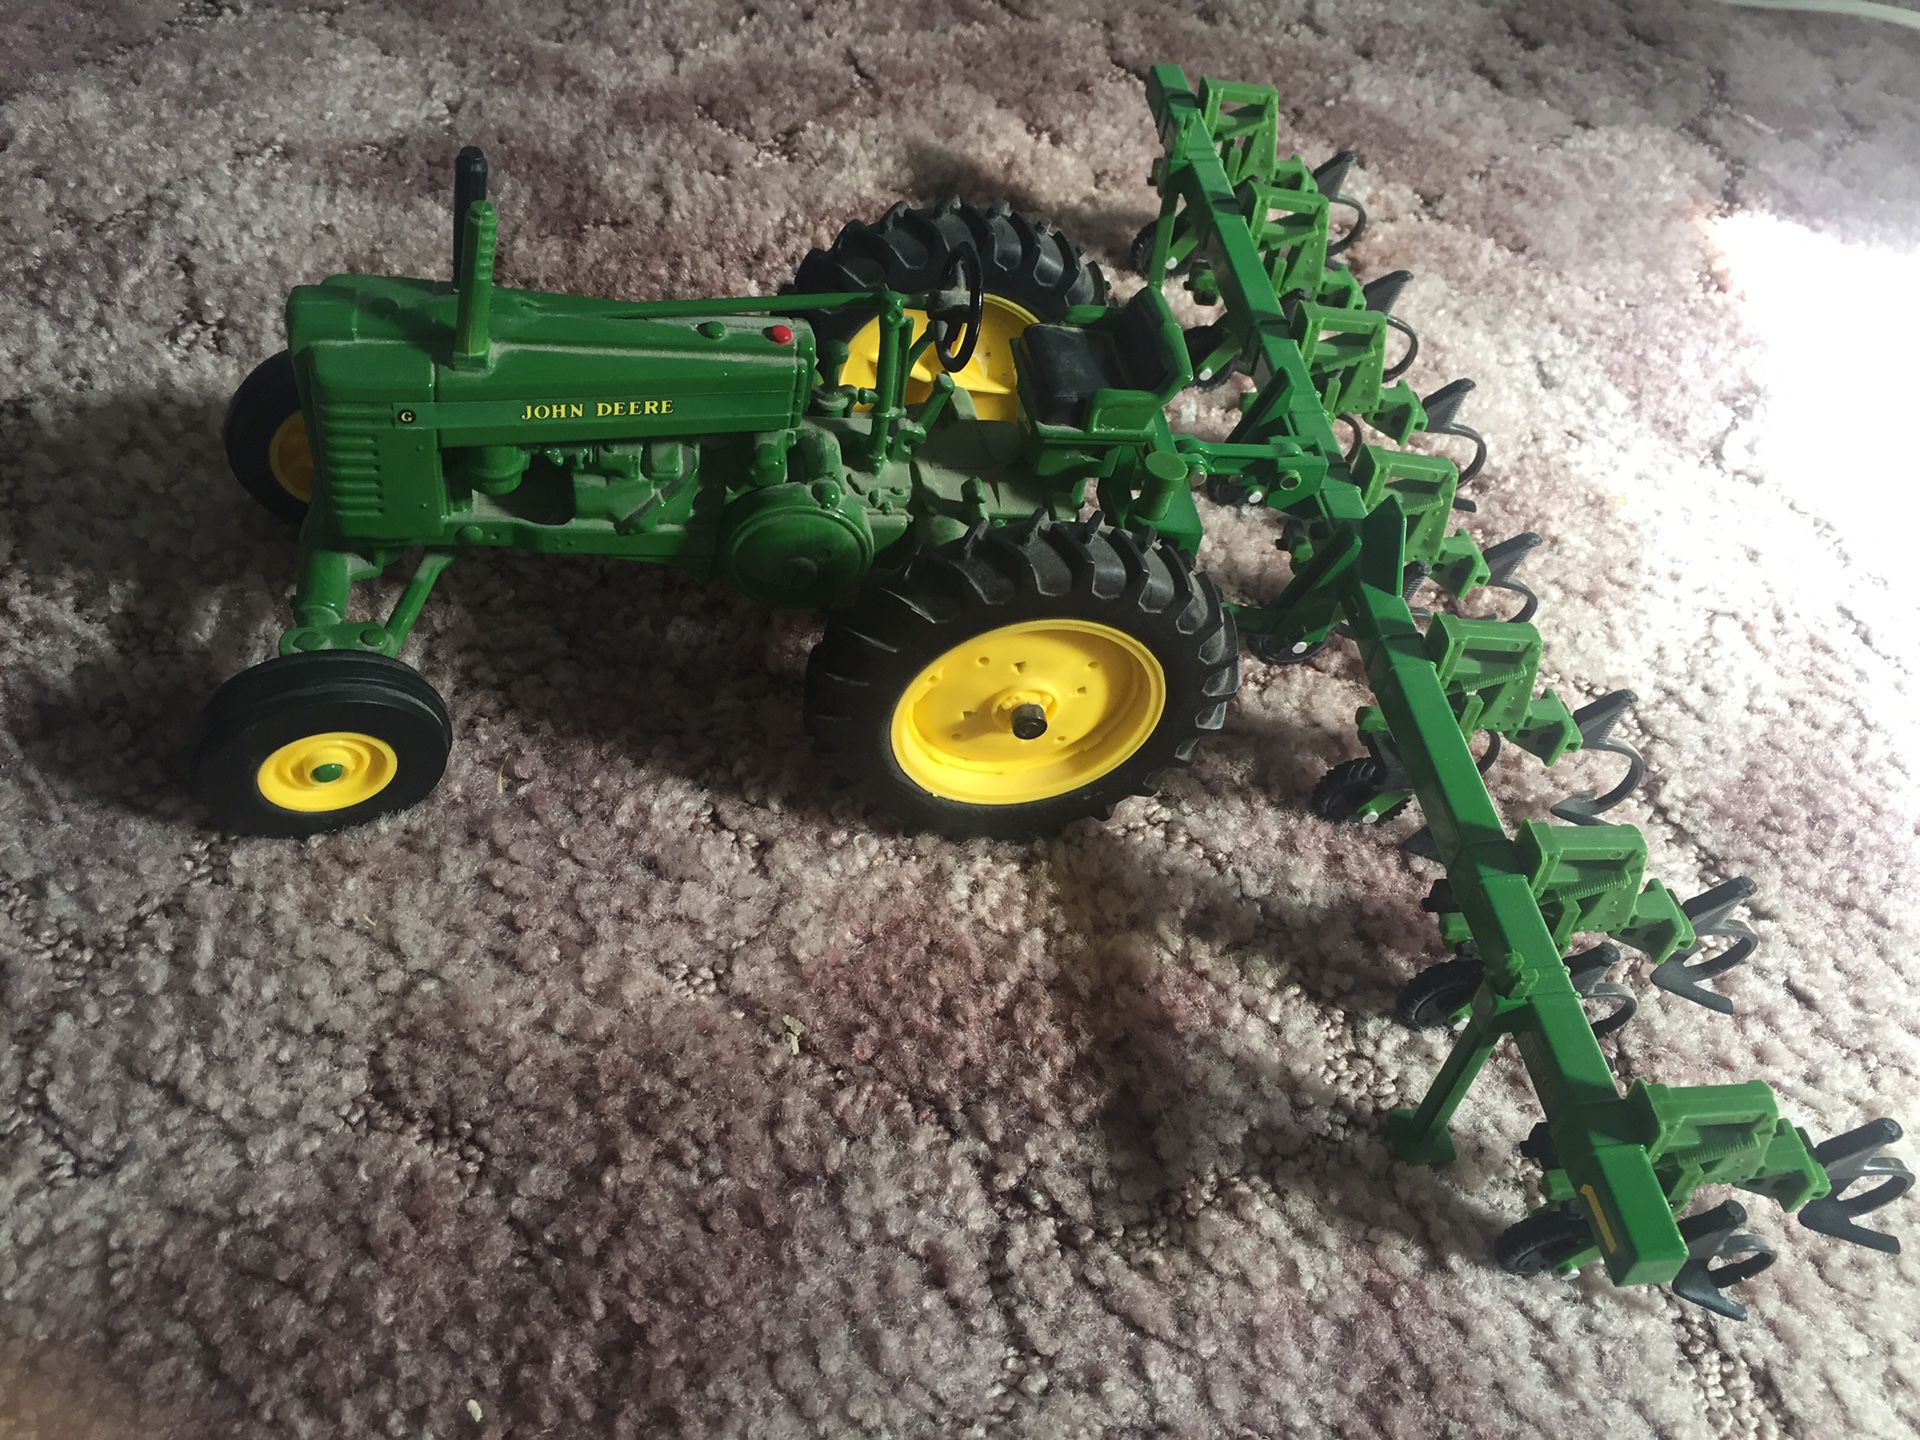 Medal John Deer tractor with attachment